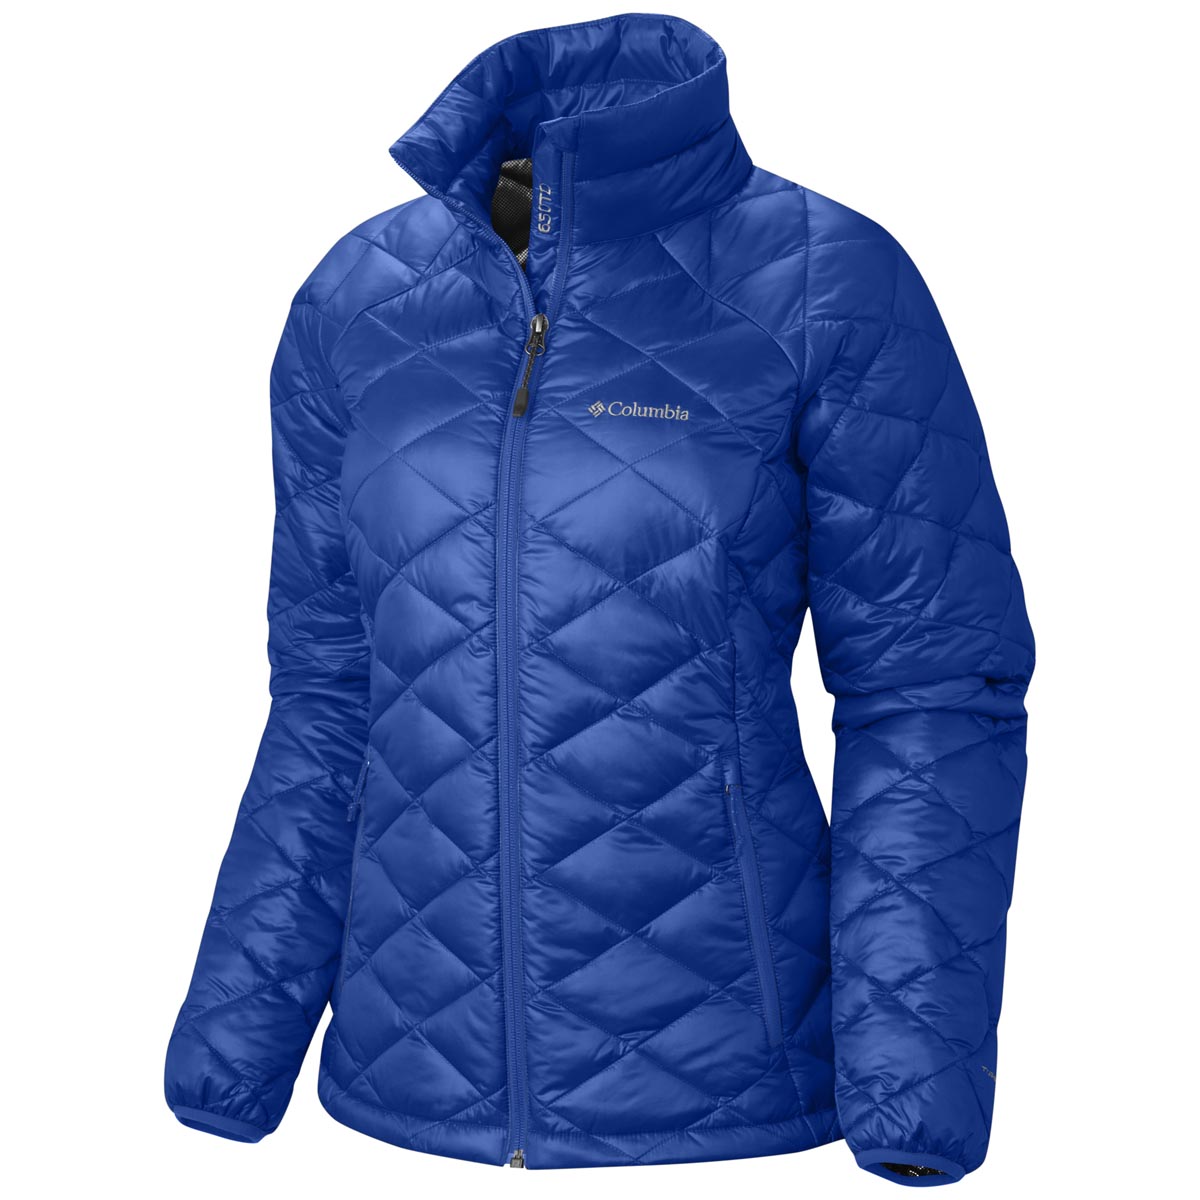 Columbia Women's Trask Mountain 650 TurboDown Jacket Discontinued Pricing